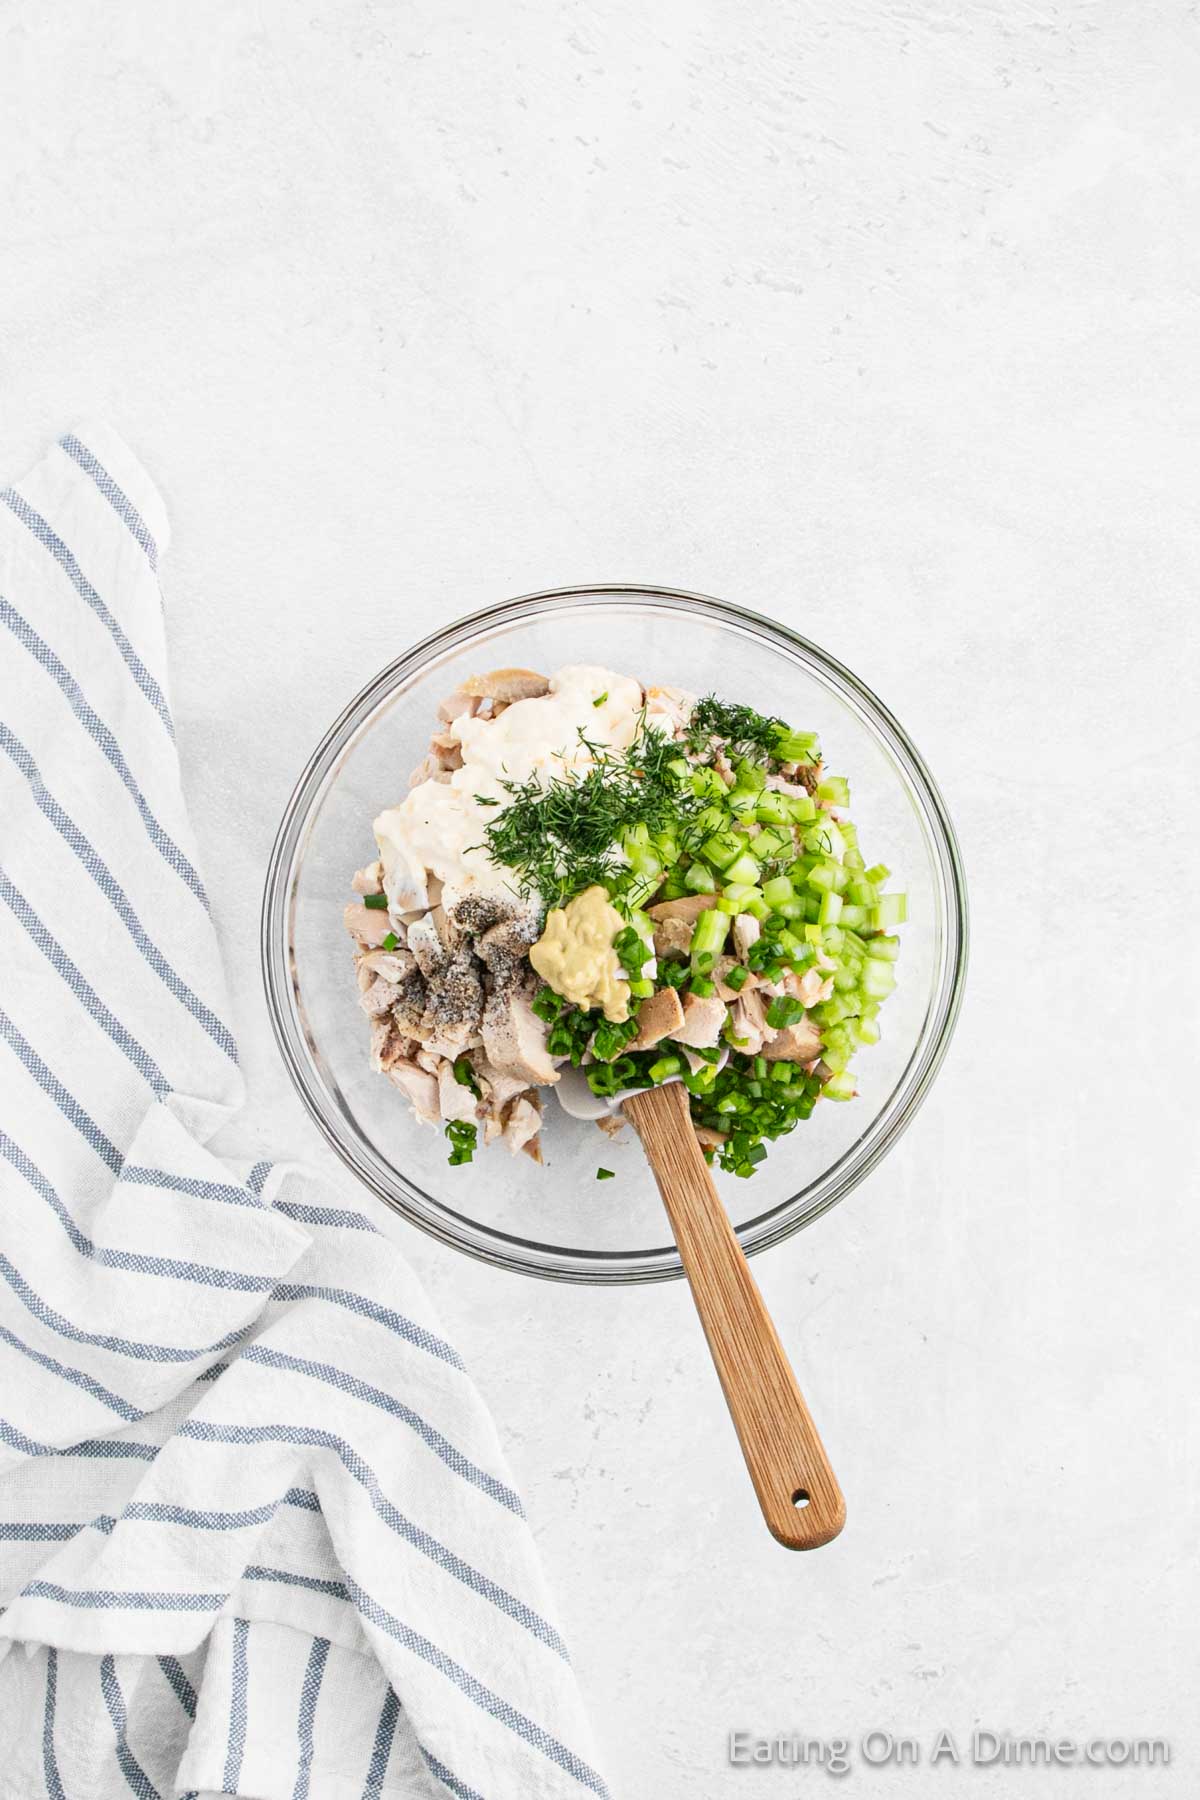 A clear bowl filled with mayo, shredded chicken, chopped celery, herbs, and seasoning sits on a white surface. A wooden spoon rests inside the bowl, while a blue and white striped cloth is folded beside it—truly the best chicken salad recipe in the making.